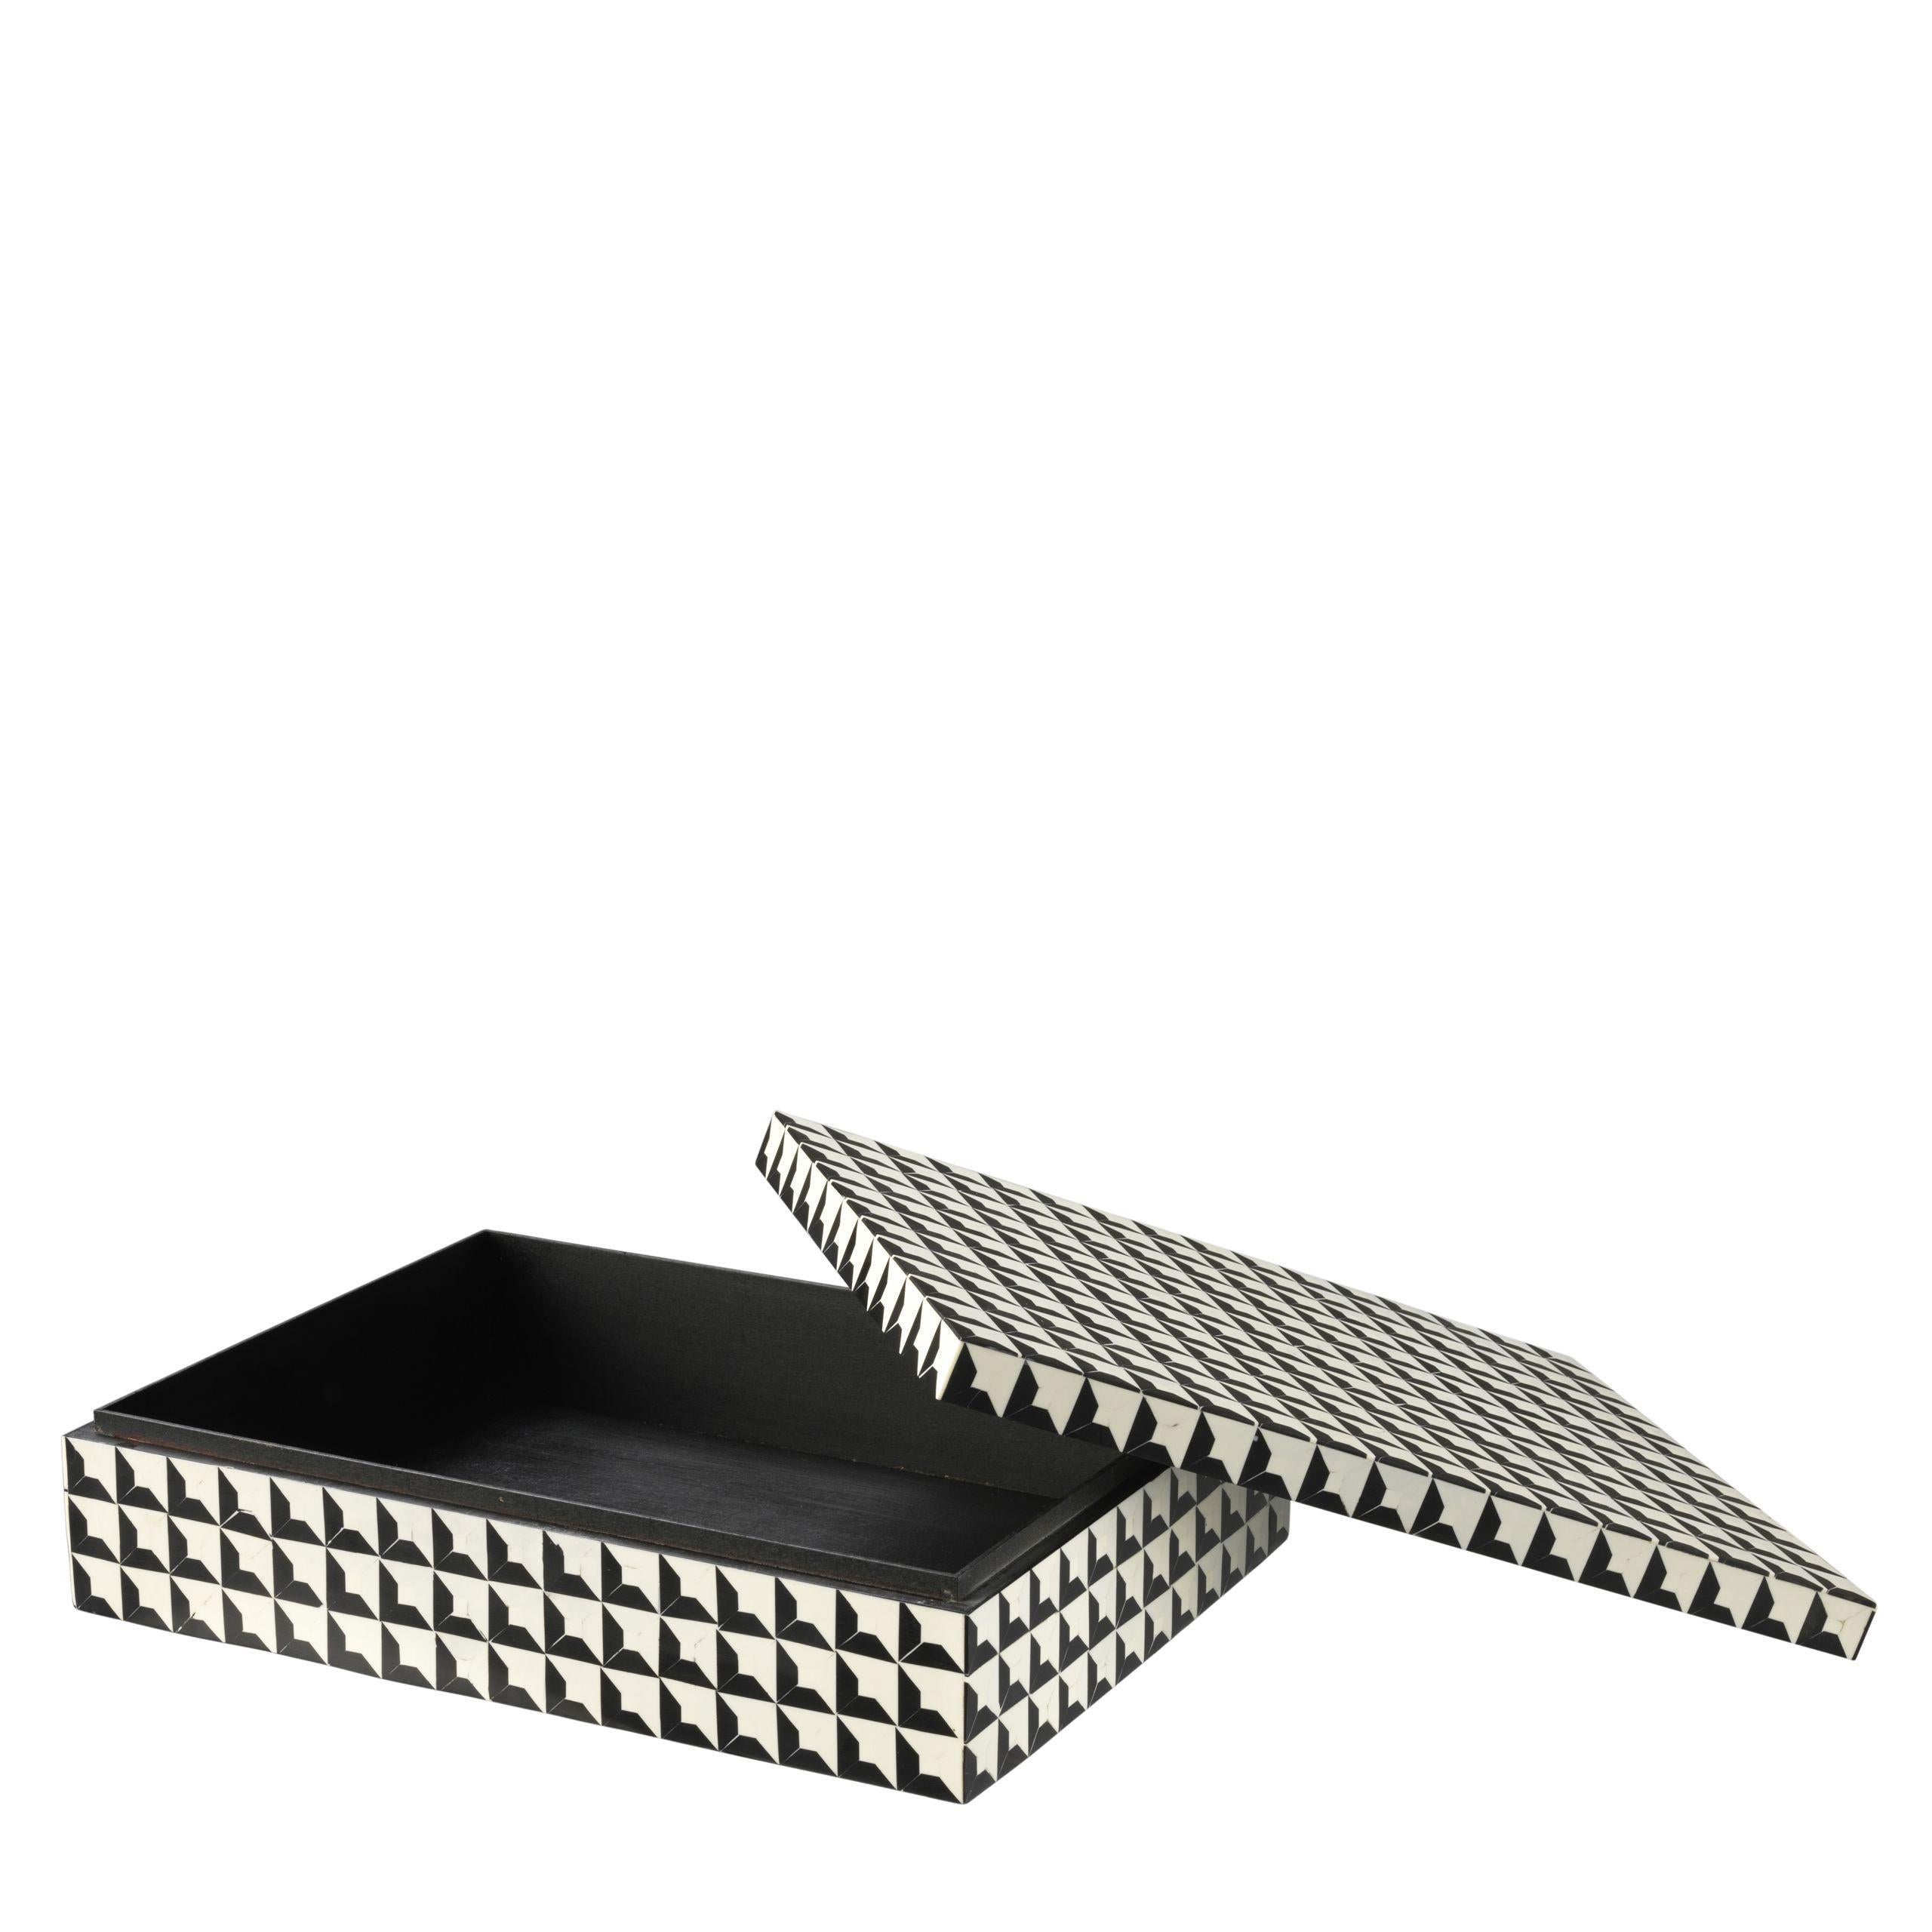 This decorative storage box with a black and white inlay design is sure to pop. At first glance it looks three dimensional but upon closer inspection it’s a flat symmetrical geometric pattern that creates an optical allusion. This fashionable